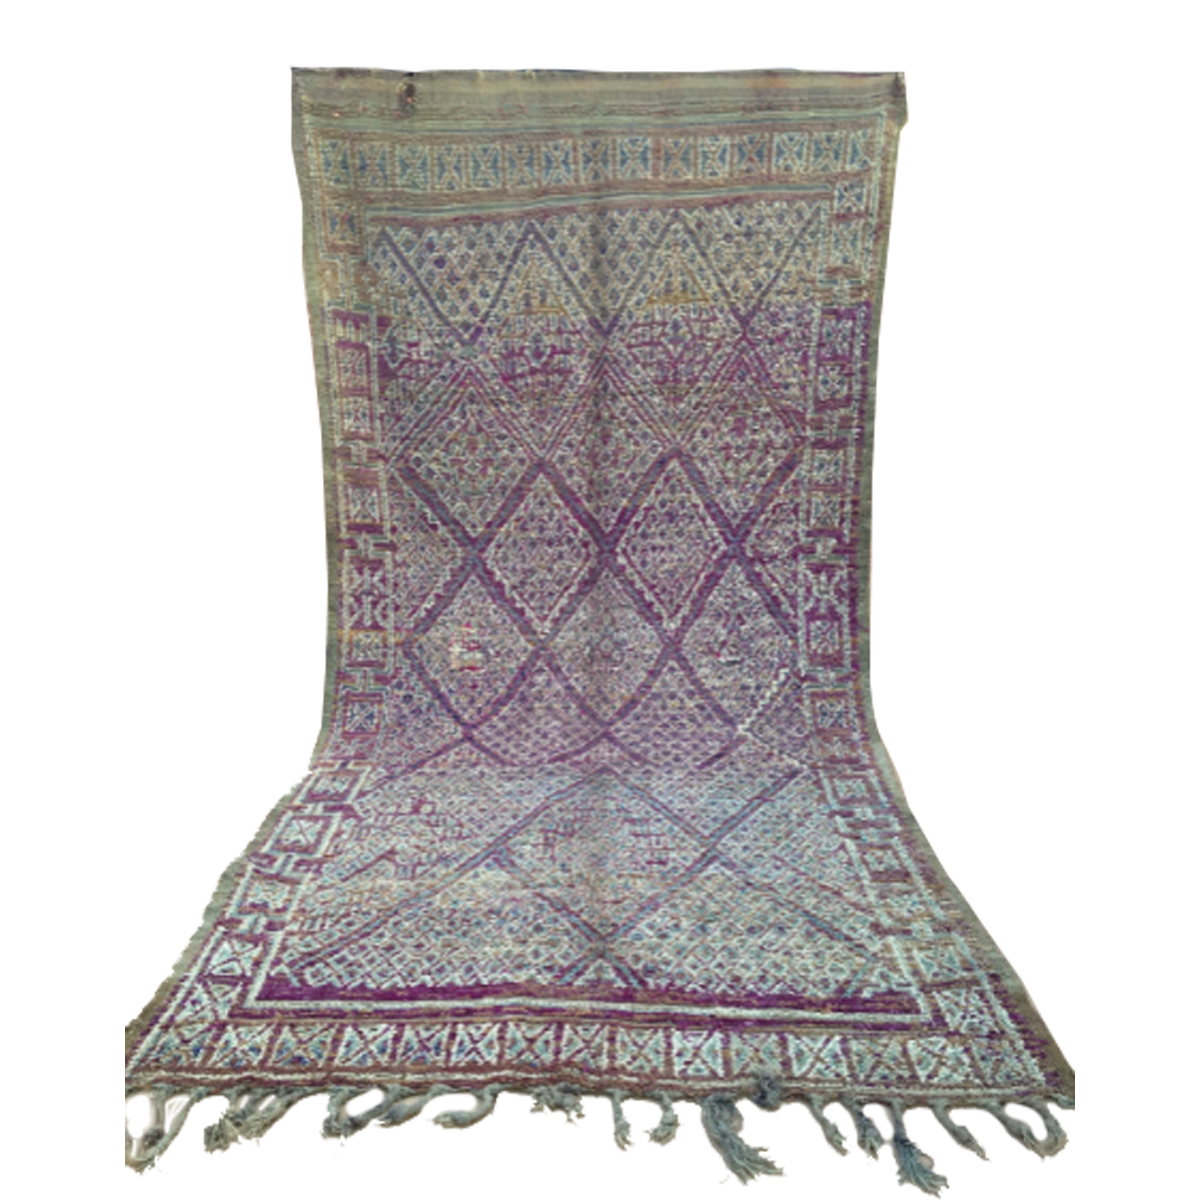 ONLINE RUGS STORE